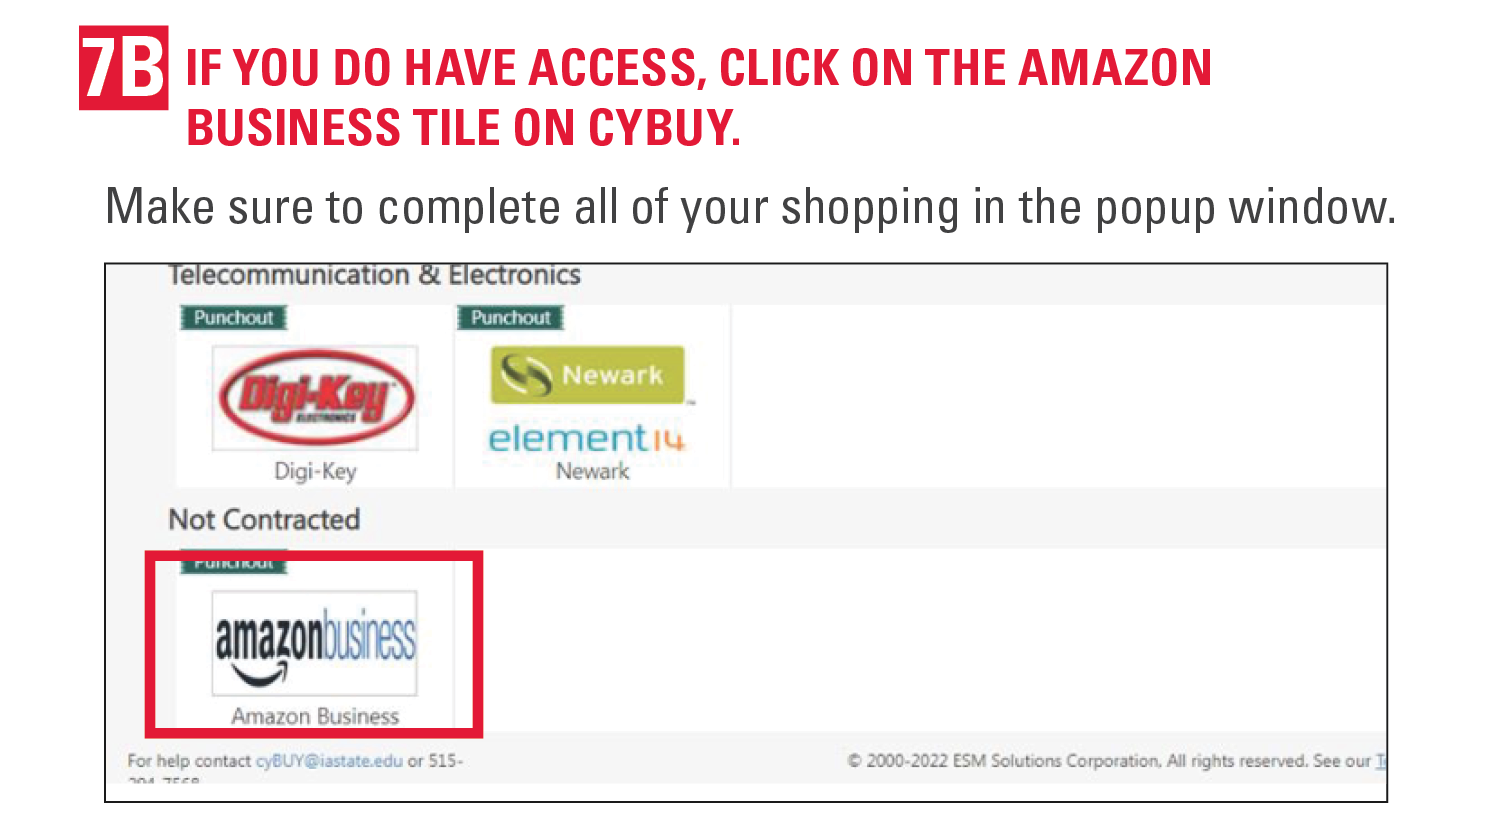 7b. If you do have access, click on the Amazon Business tile on cyBUY. Make sure to complete all of your shopping in the popup window.